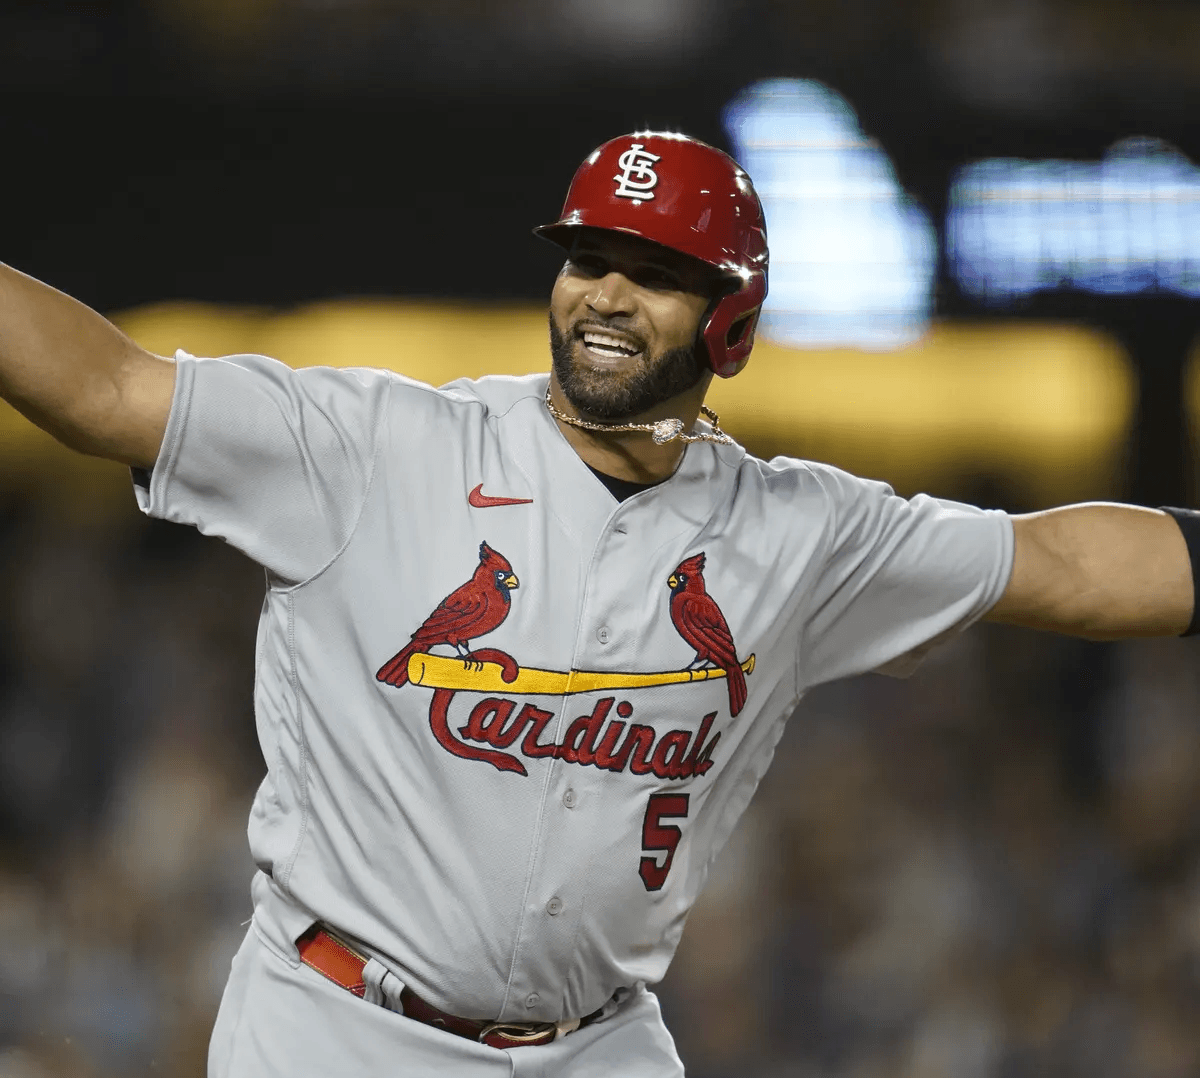 Albert Pujols Rookie Cards: Value, Tracking & Hot Deals